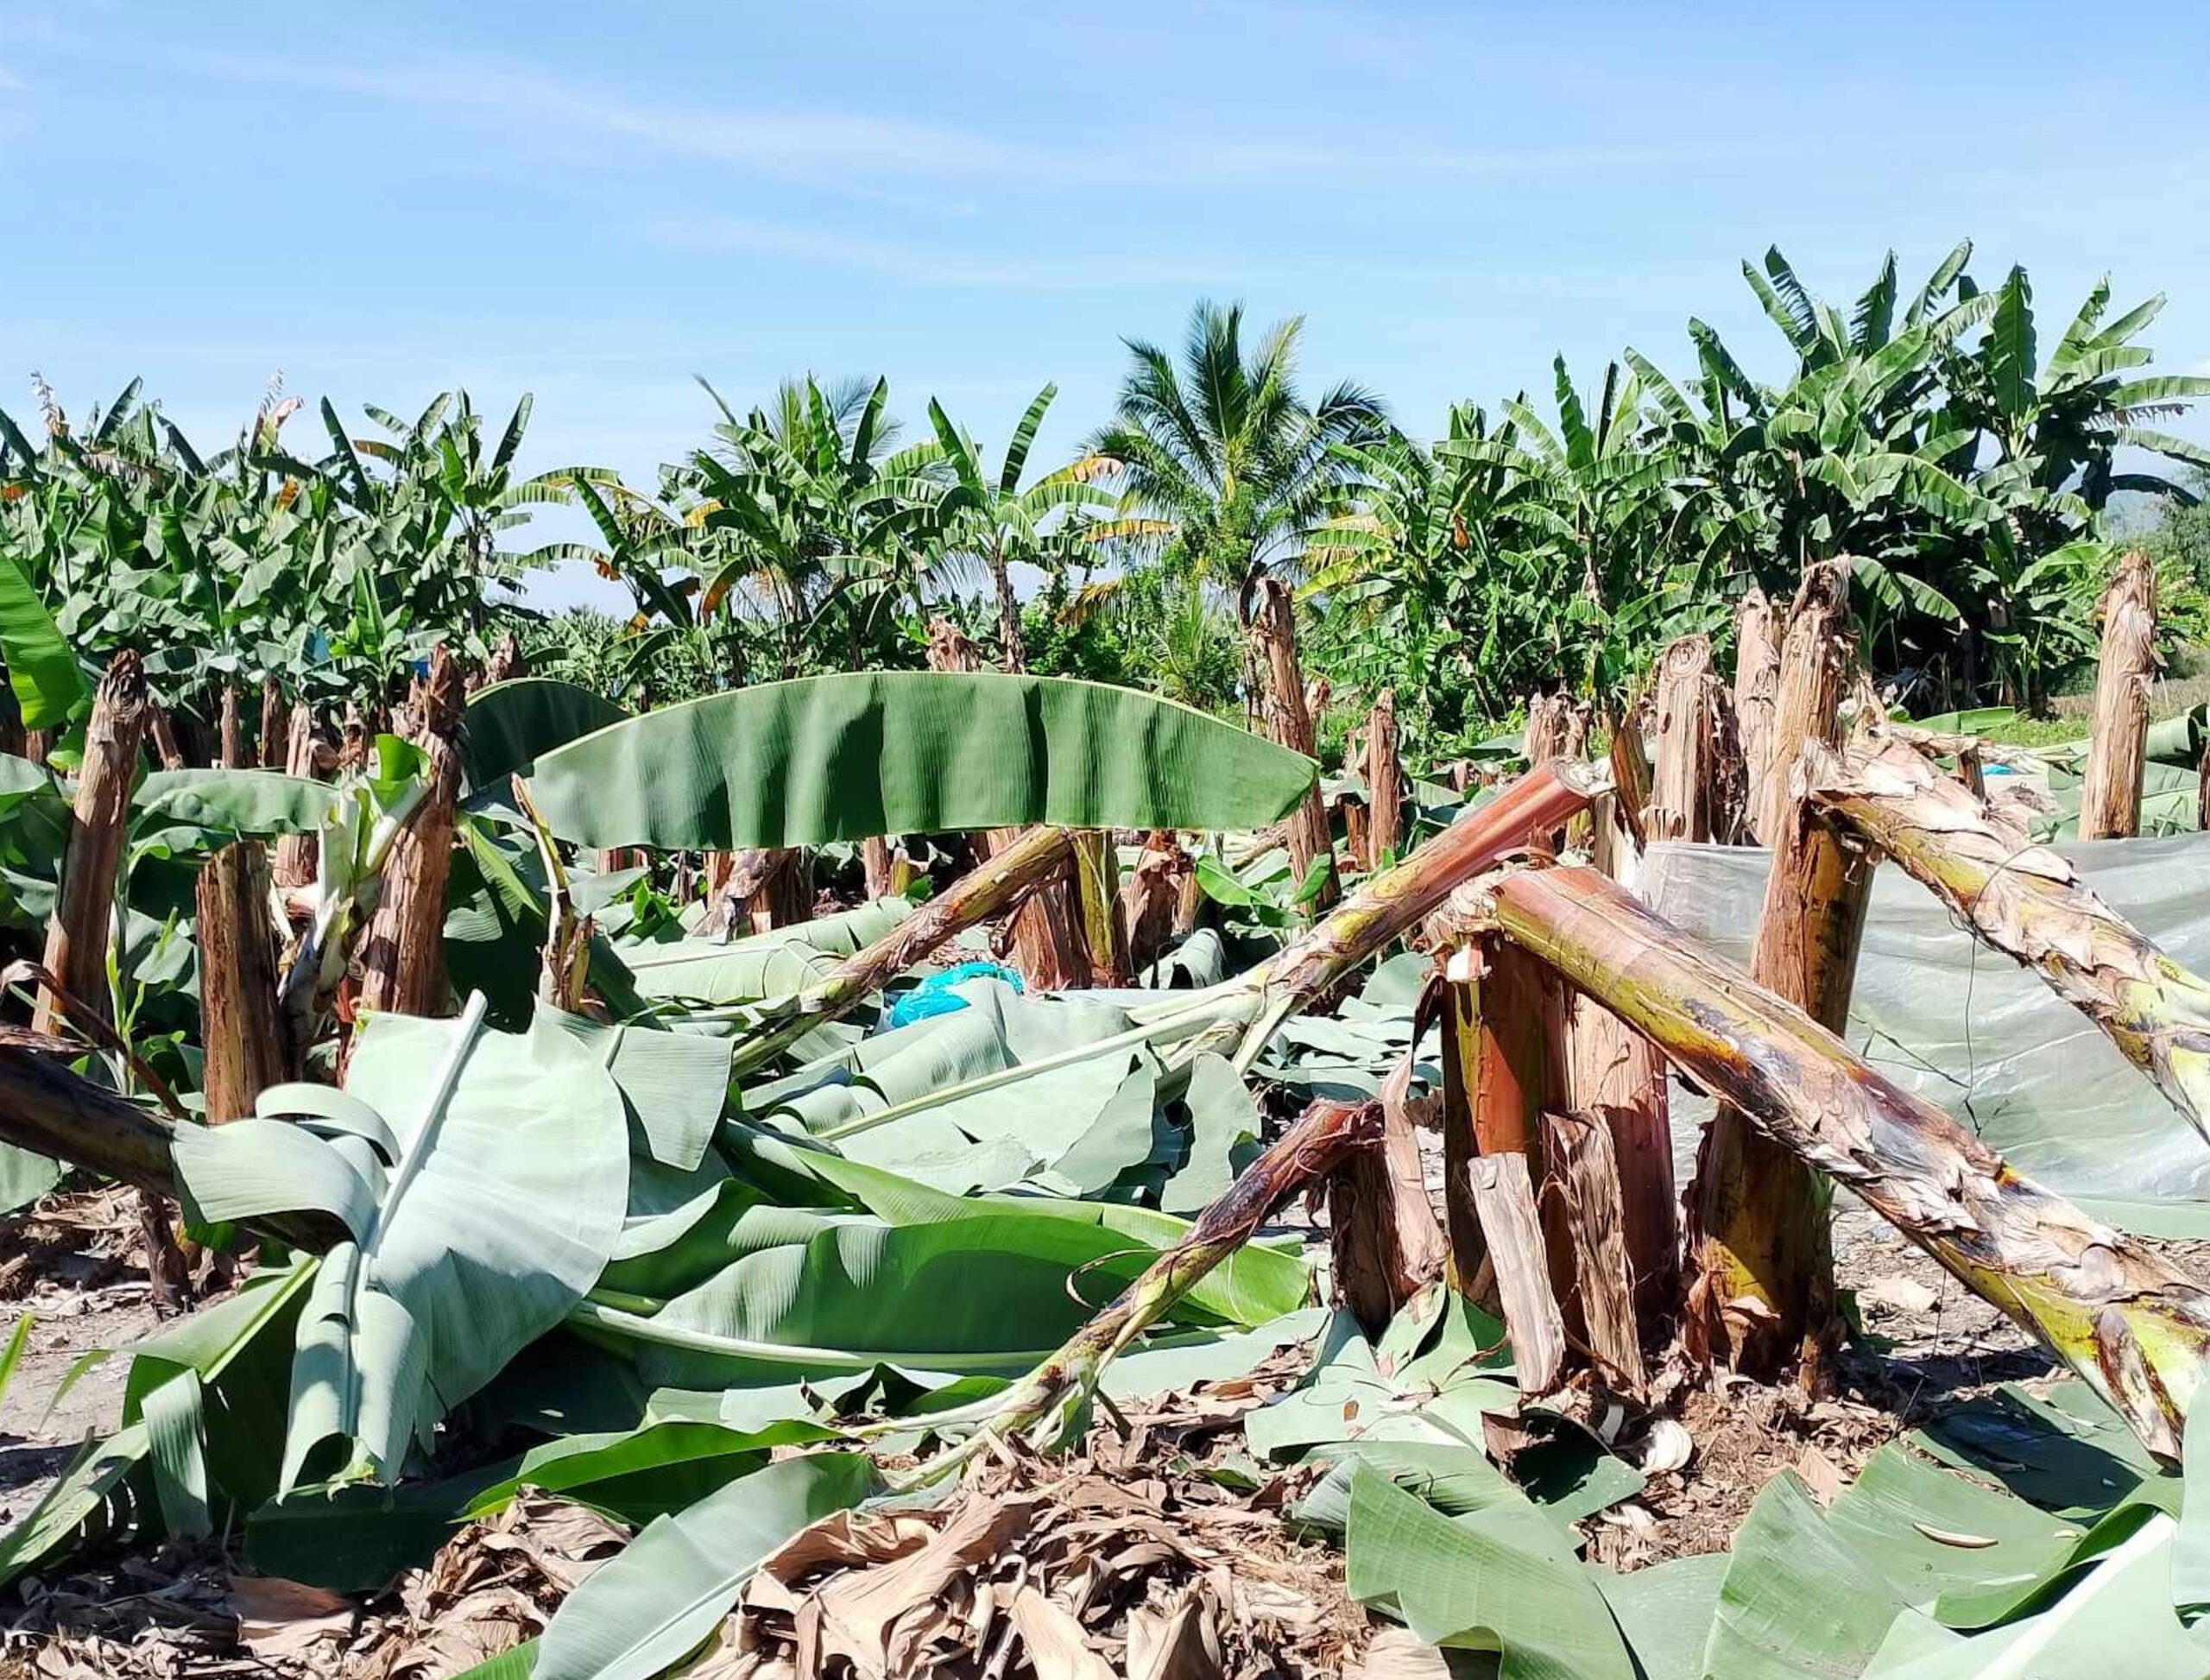 Tbolis cut down thousands of firm’s banana plants in South Cotabato